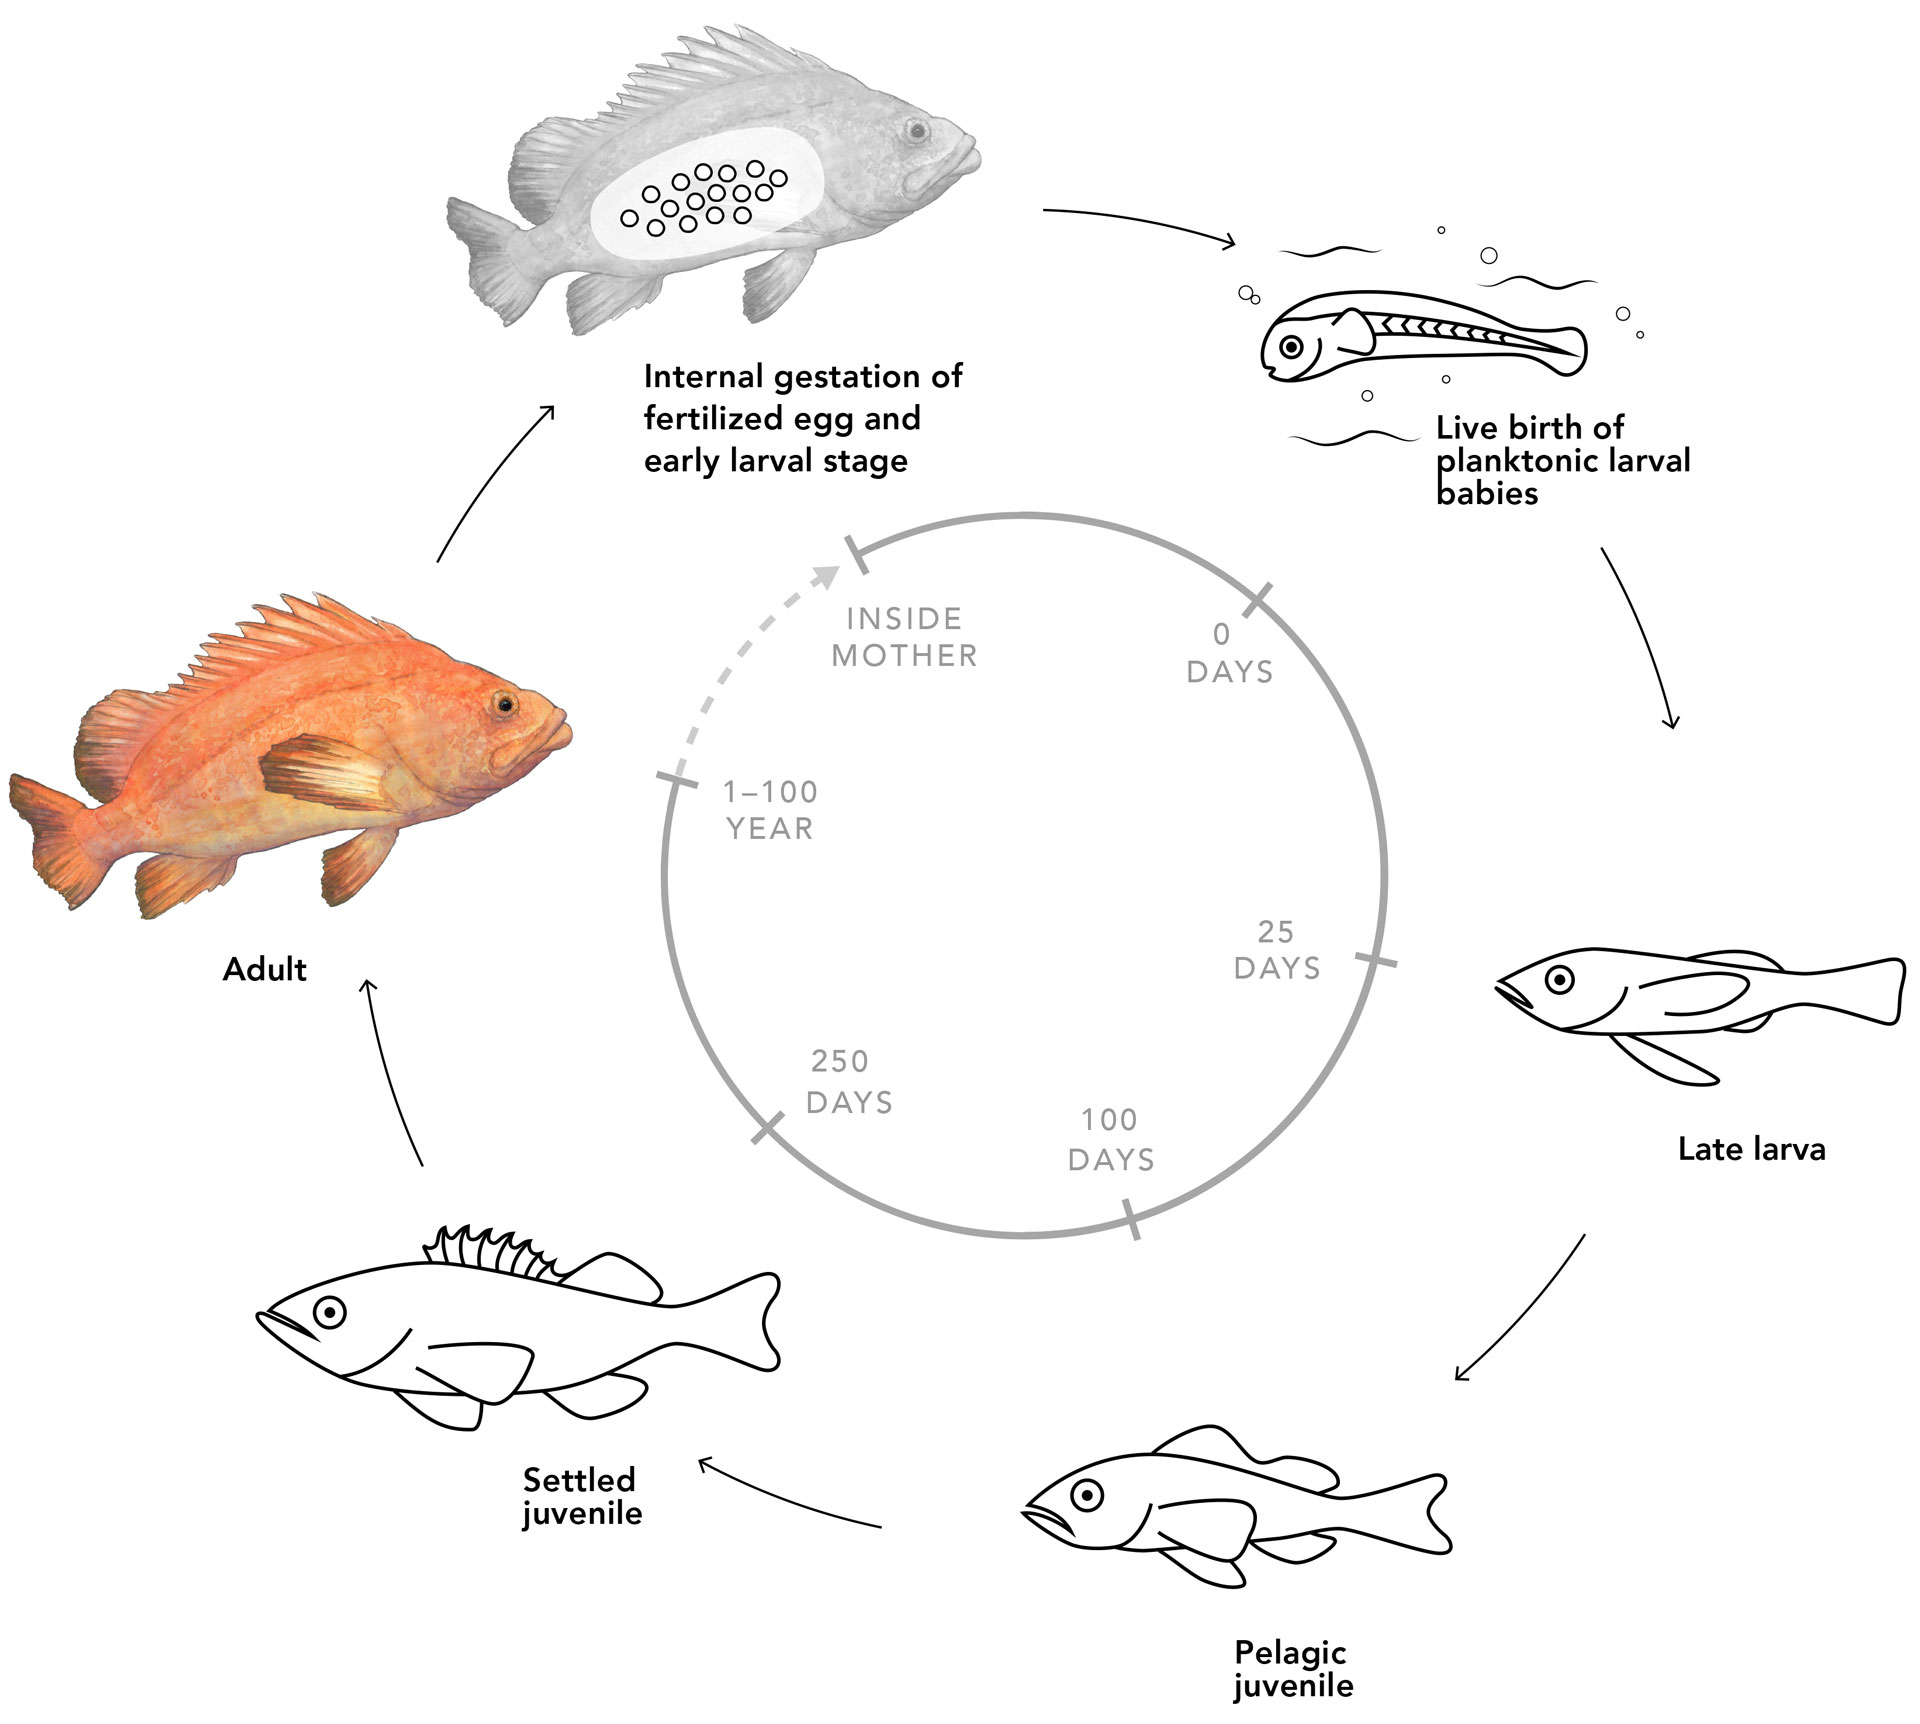 Diagram showing reproduction cycle of Rockfish